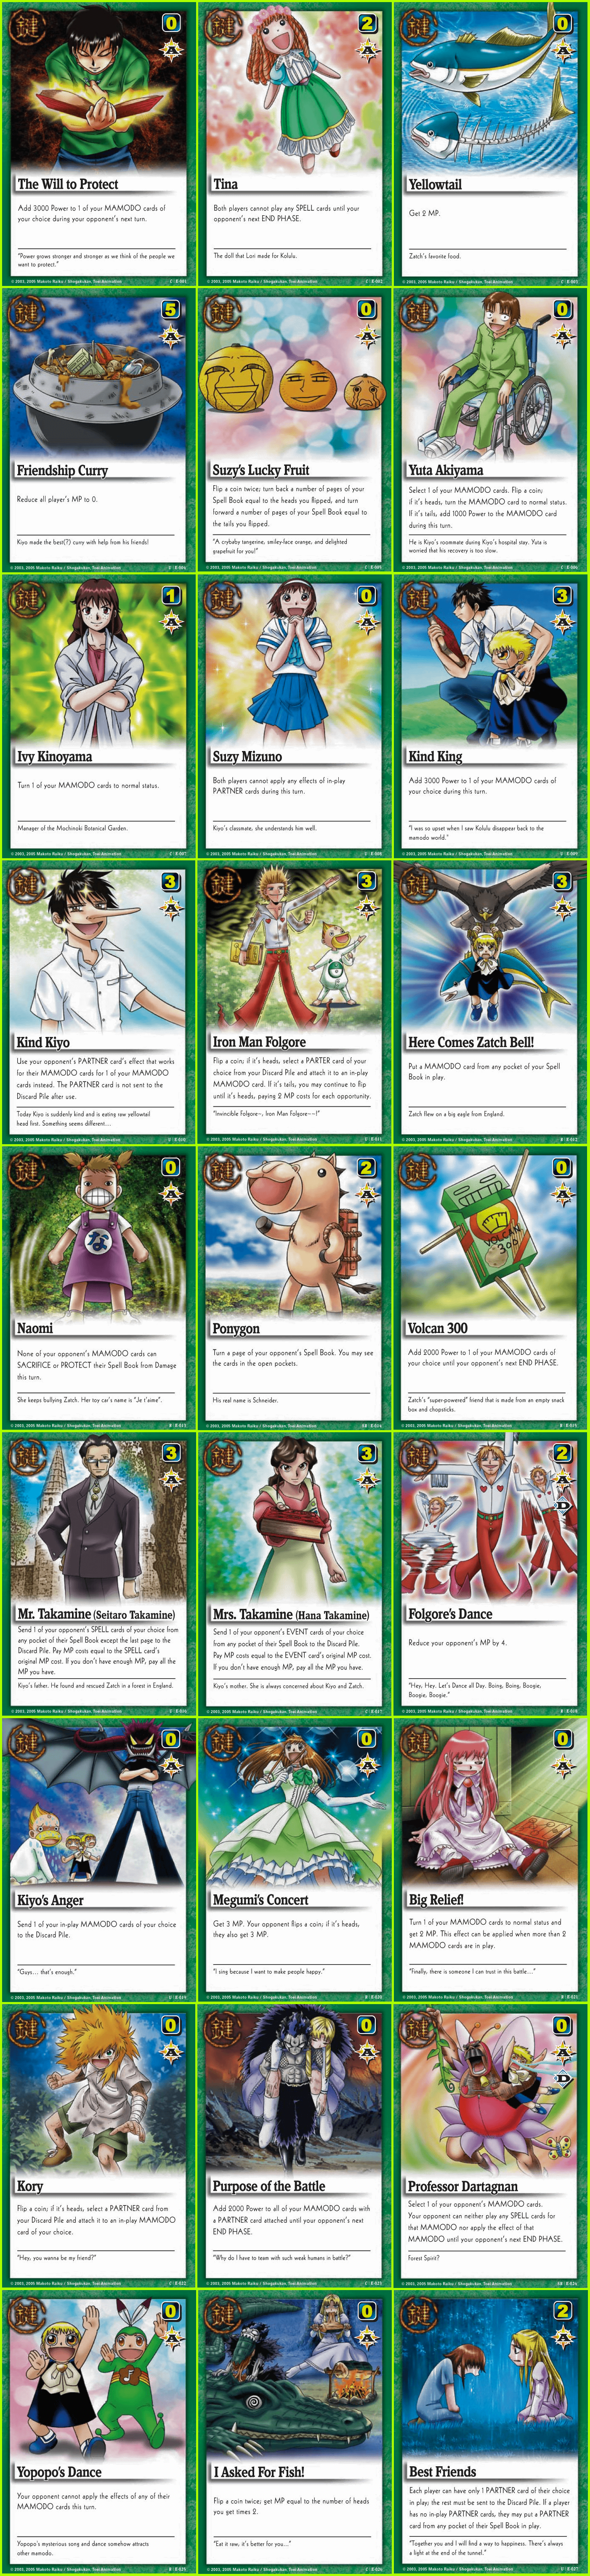 Event Cards